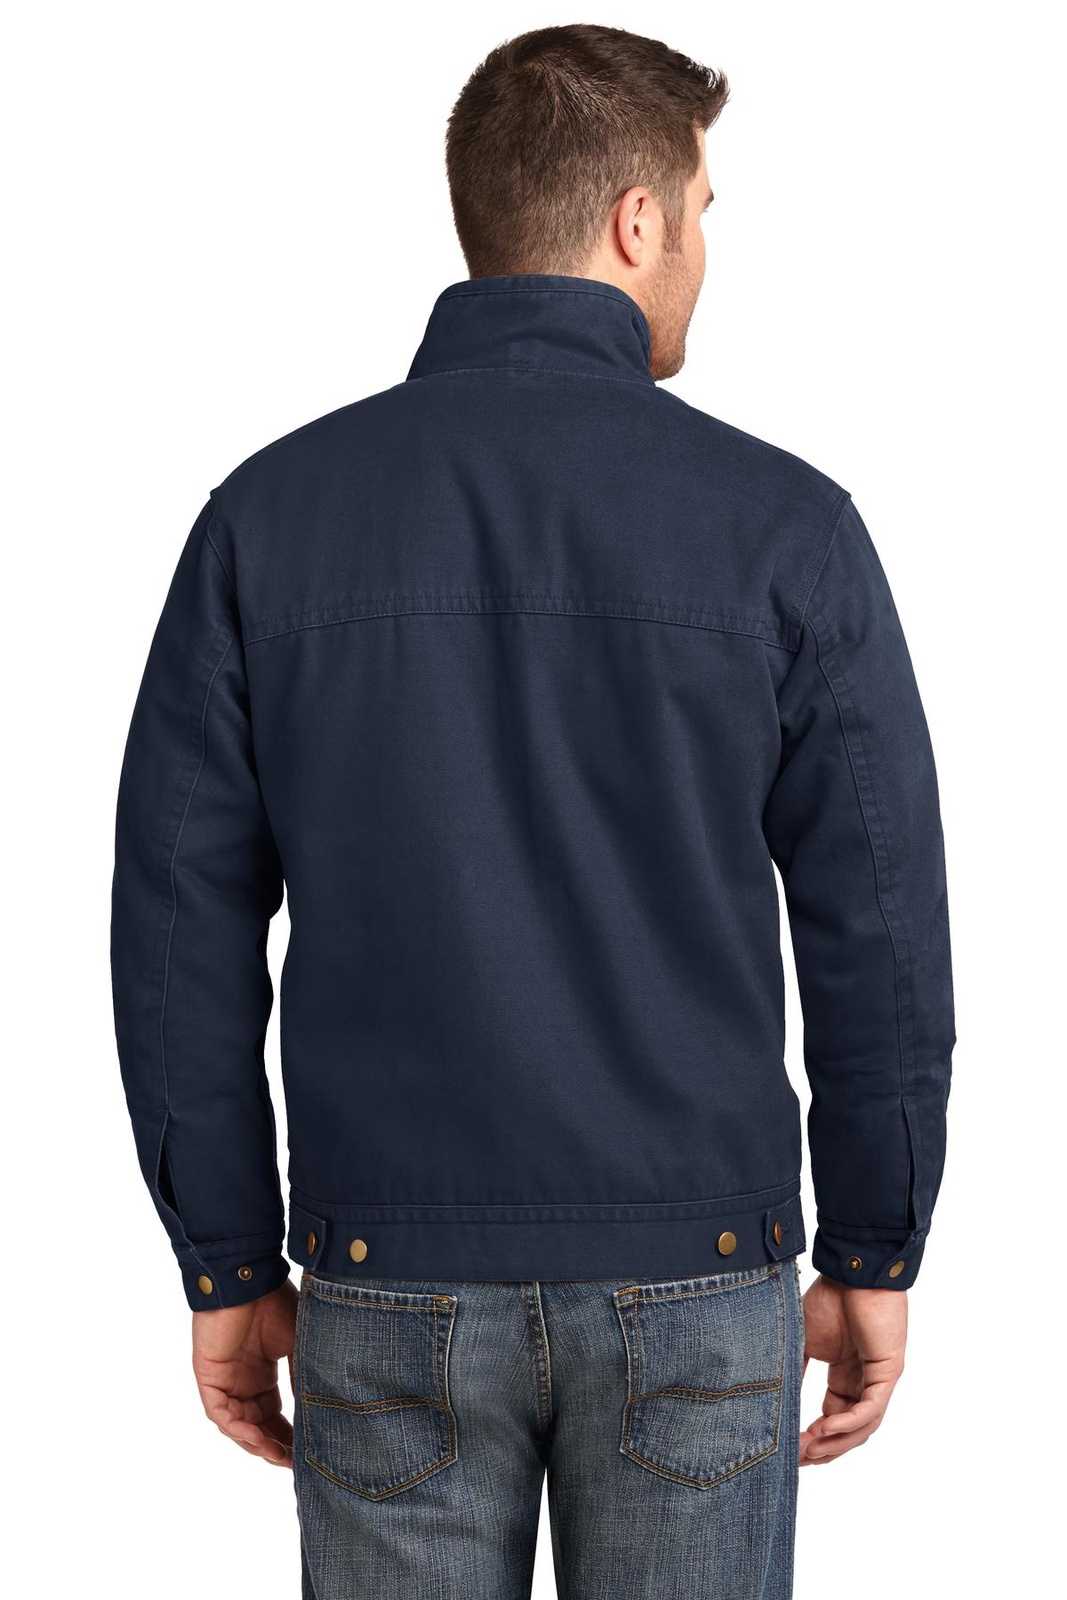 CornerStone CSJ40 Washed Duck Cloth Flannel-Lined Work Jacket - Navy - HIT a Double - 2